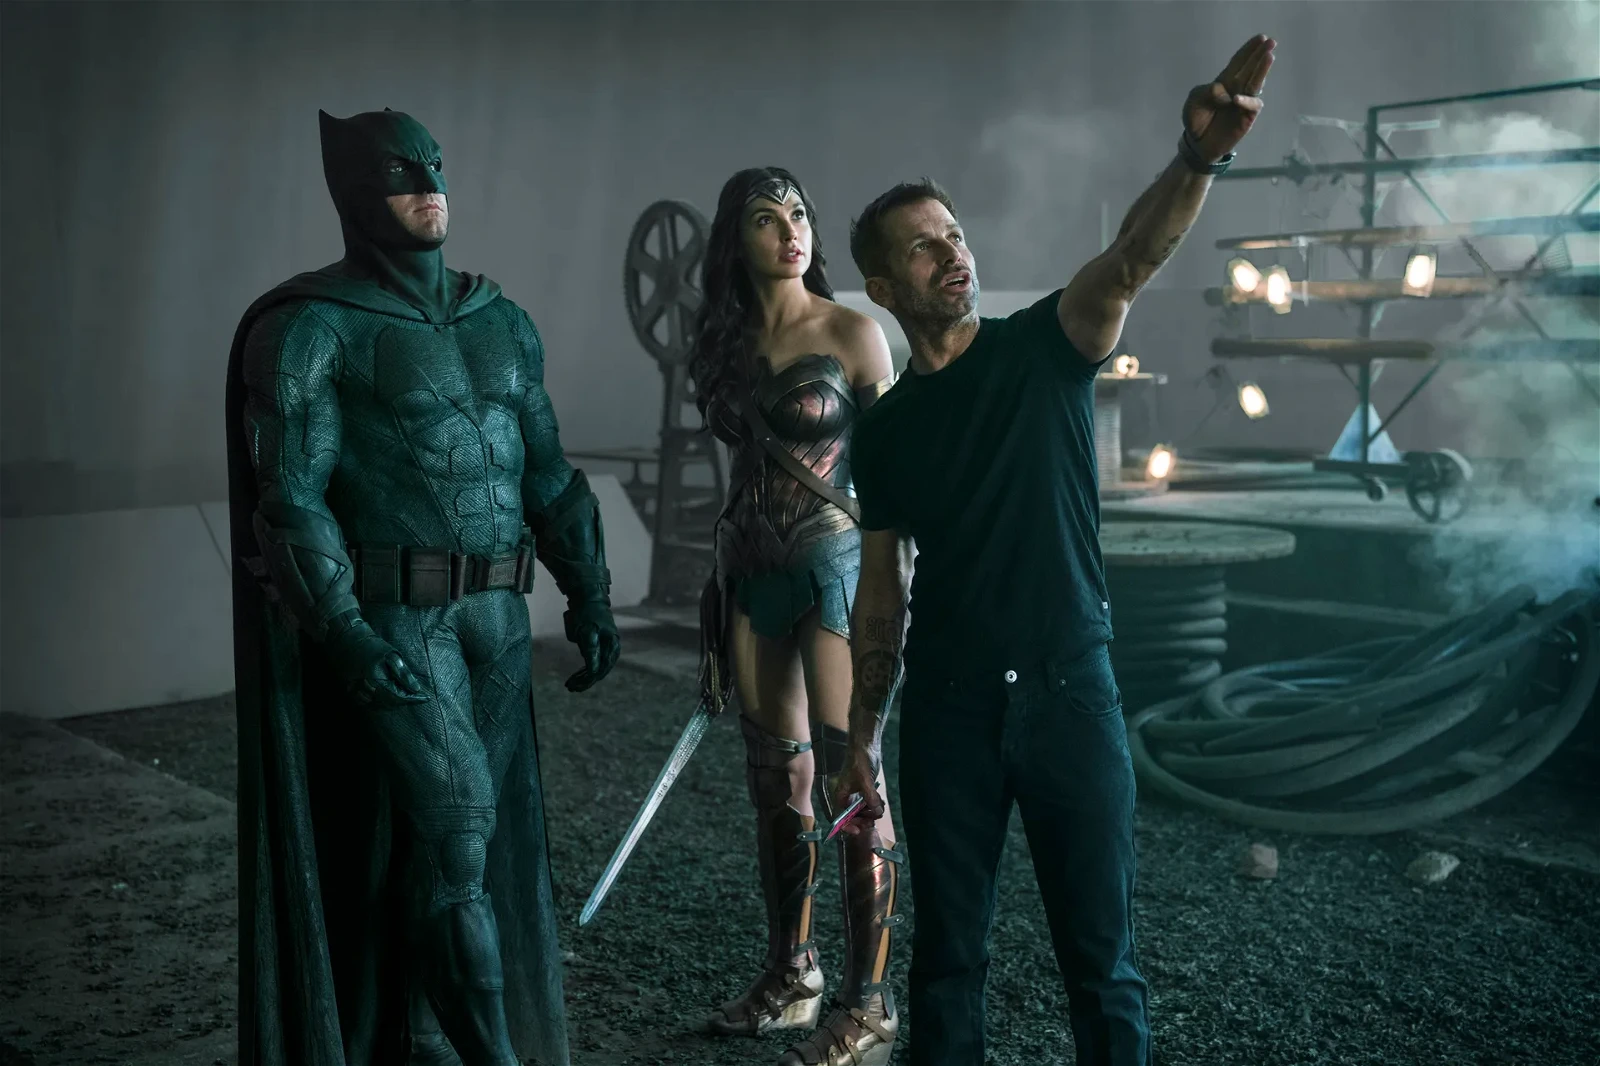 Zack Snyder on the sets of Justice League (2021) along with Ben Affleck and Gal Gadot.